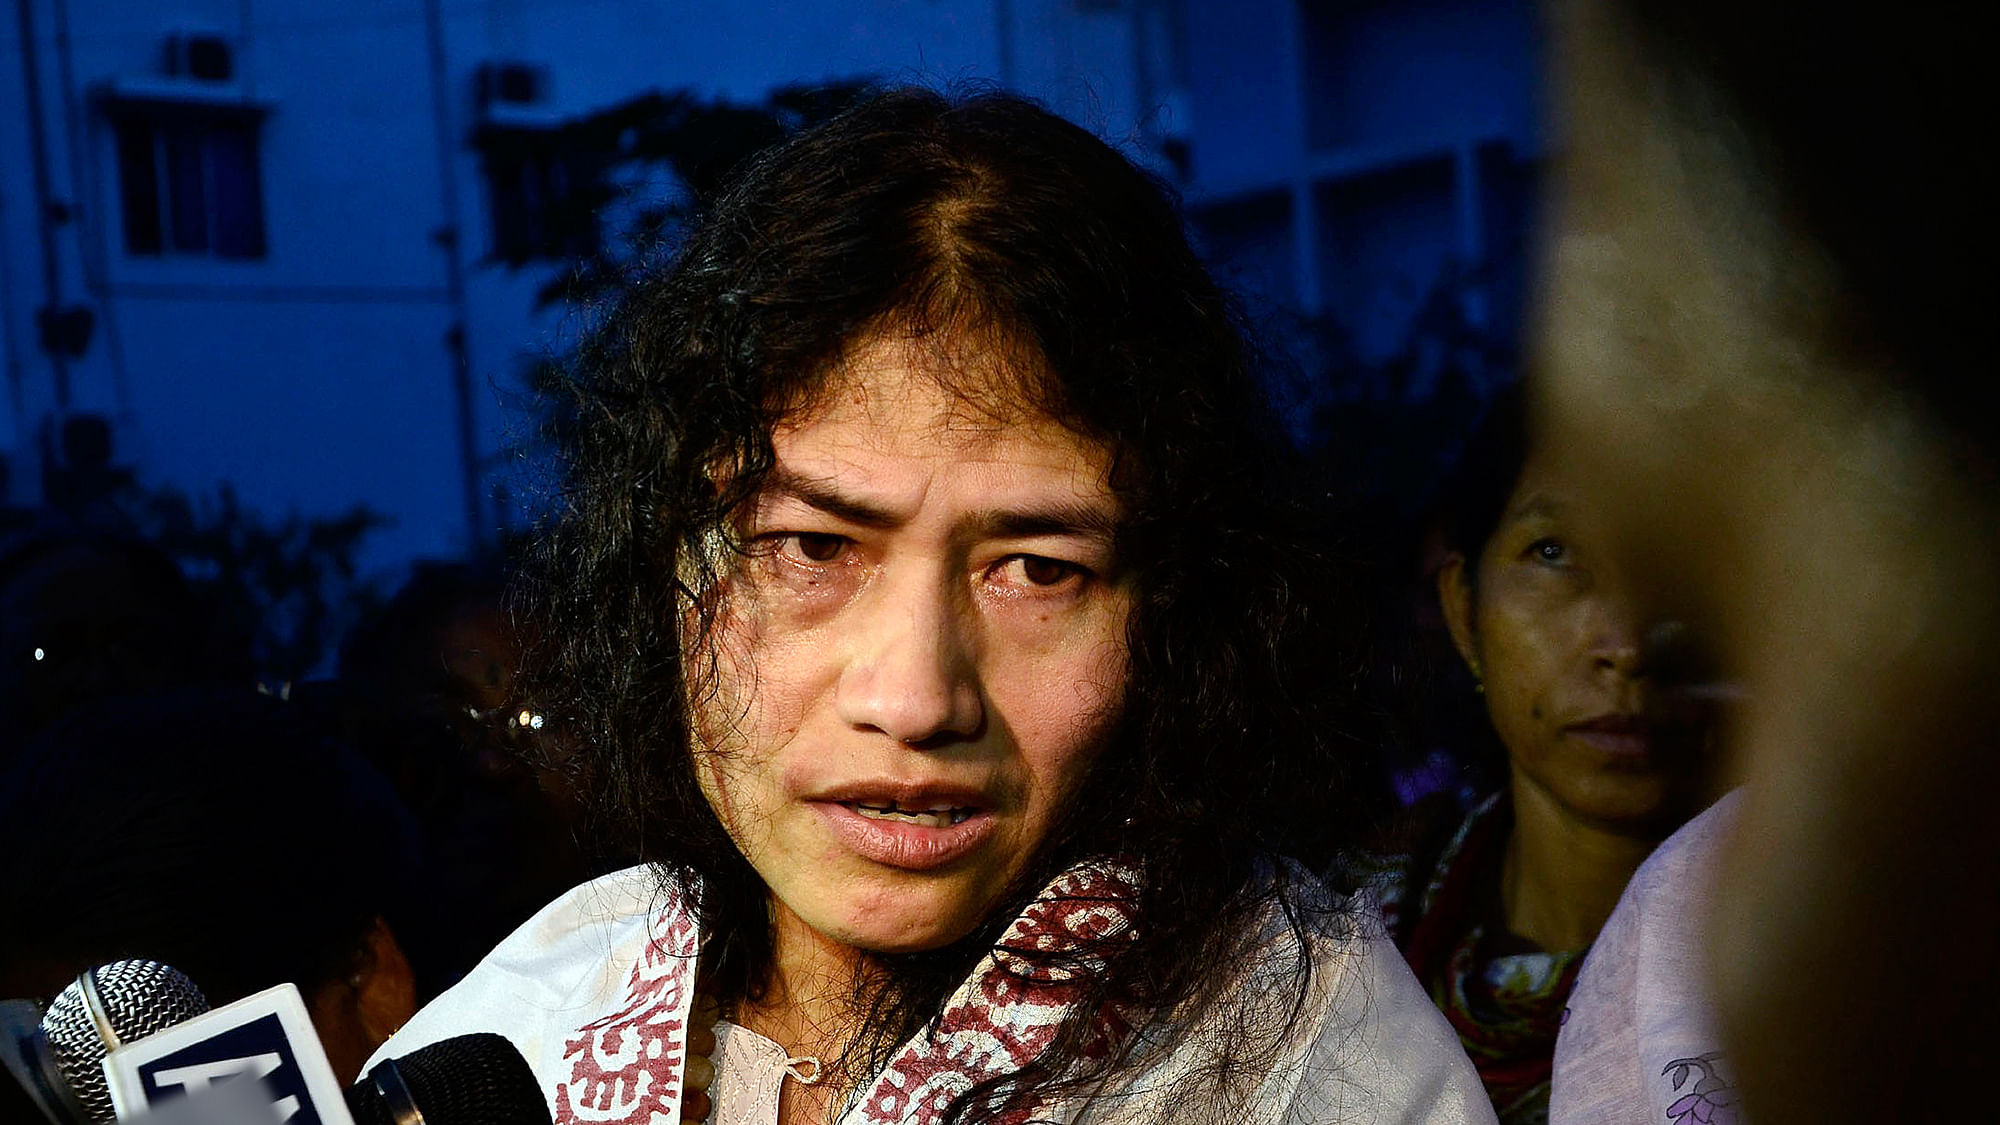 Irom Sharmila, the face of anti-AFSPA crusade, speaks to the media in Delhi. (Photo : Reuters)